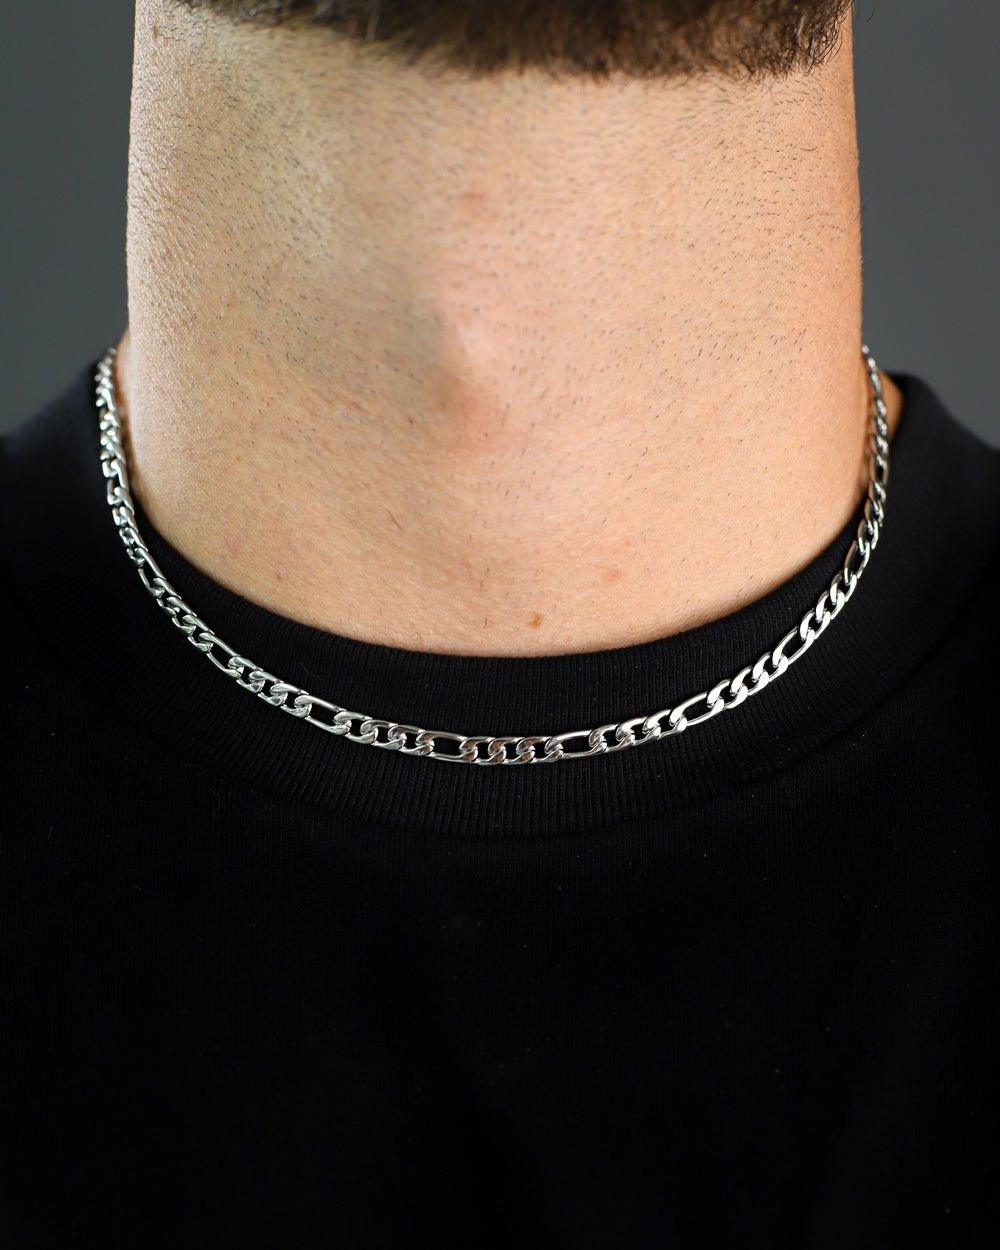 CLEAN FIGARO CHAIN. - 5MM WHITE GOLD - DRIP IN THE JEWEL